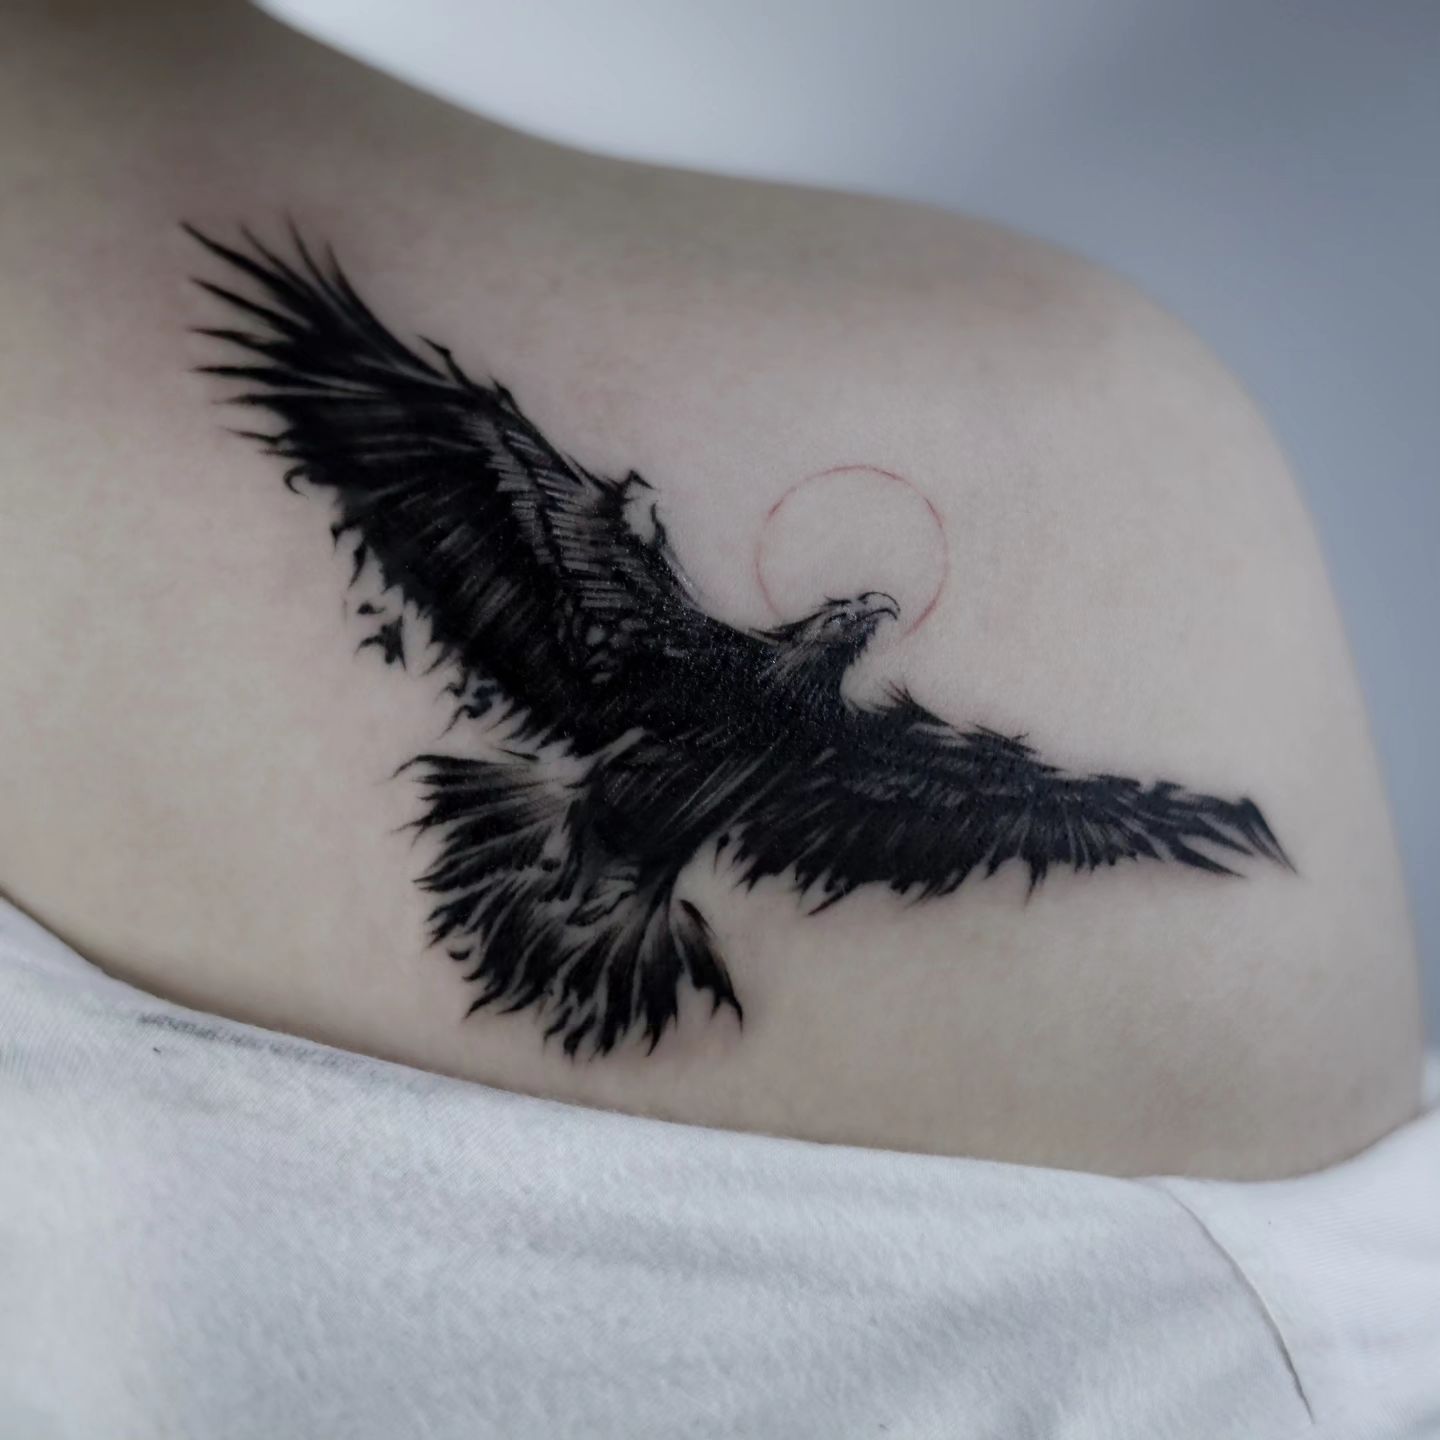 eagle on back tattoo by dyed tattoo